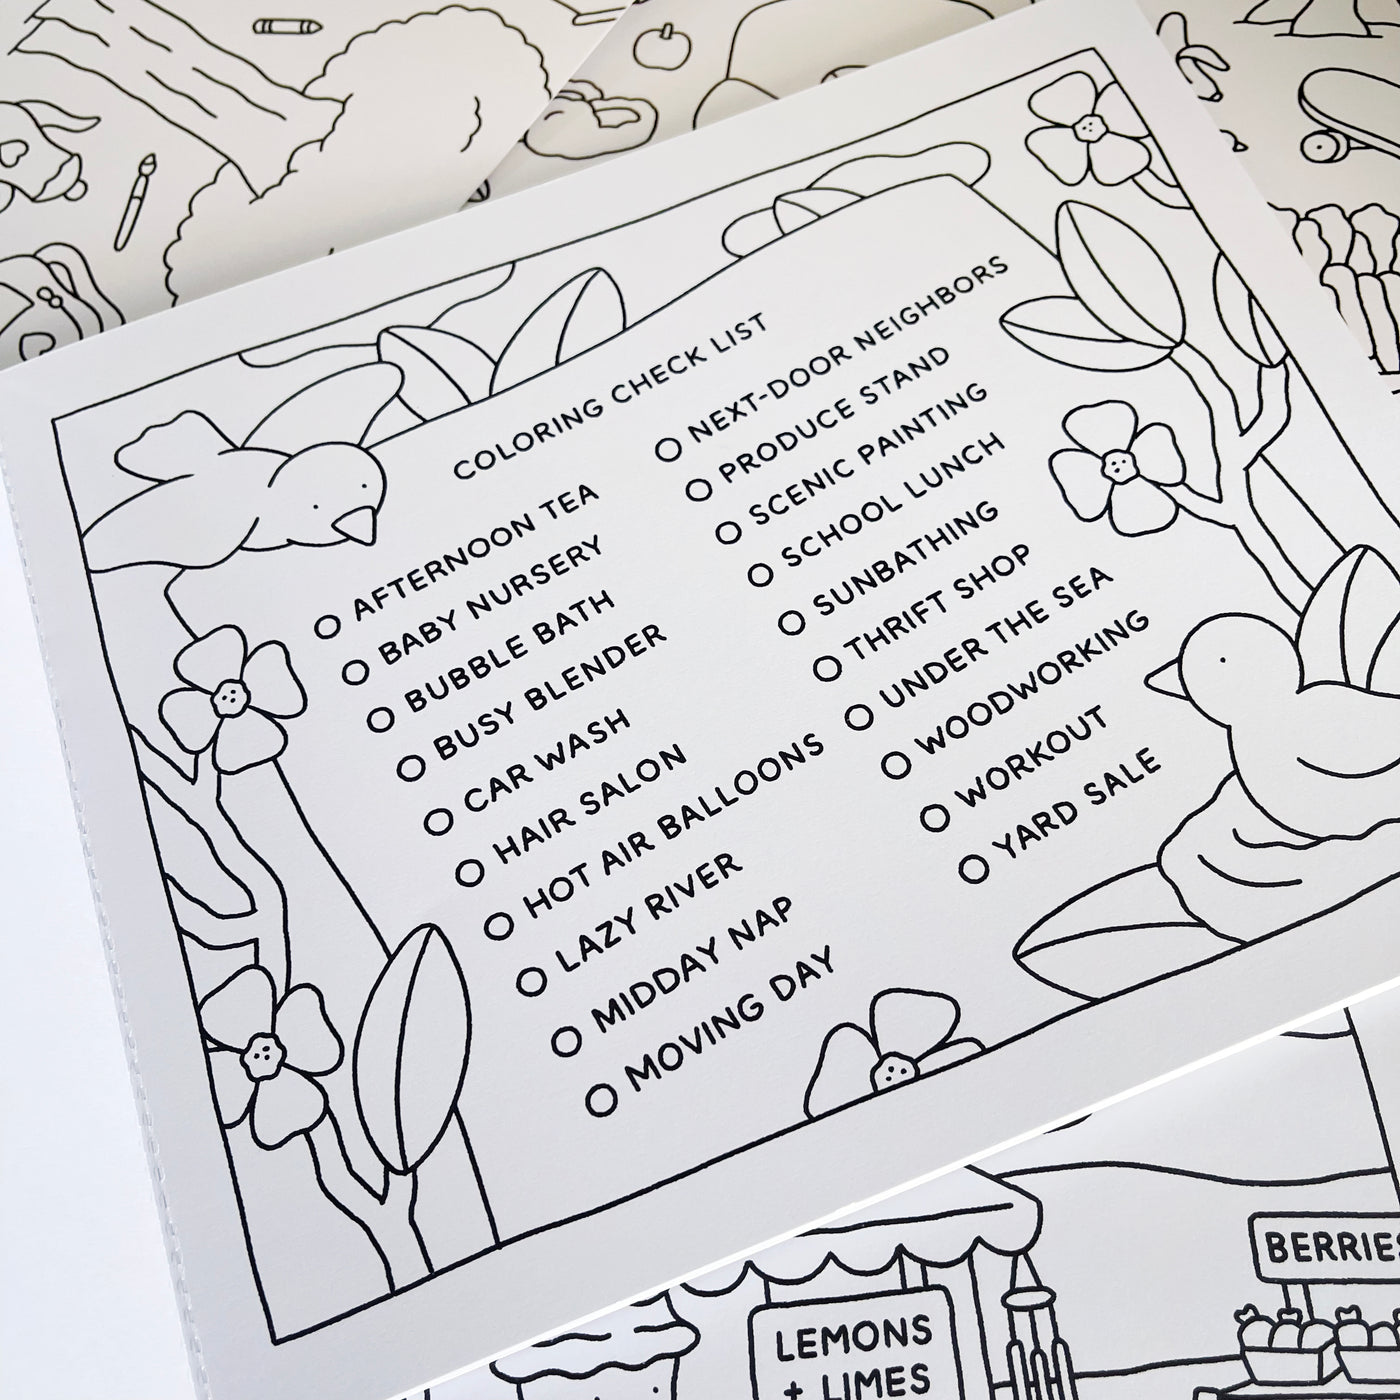 Coloring Book: Unofficial Coloring Book for Kids and All Fans. The boobiegoods  Coloring Book for Children and Kids by Contrino Publish